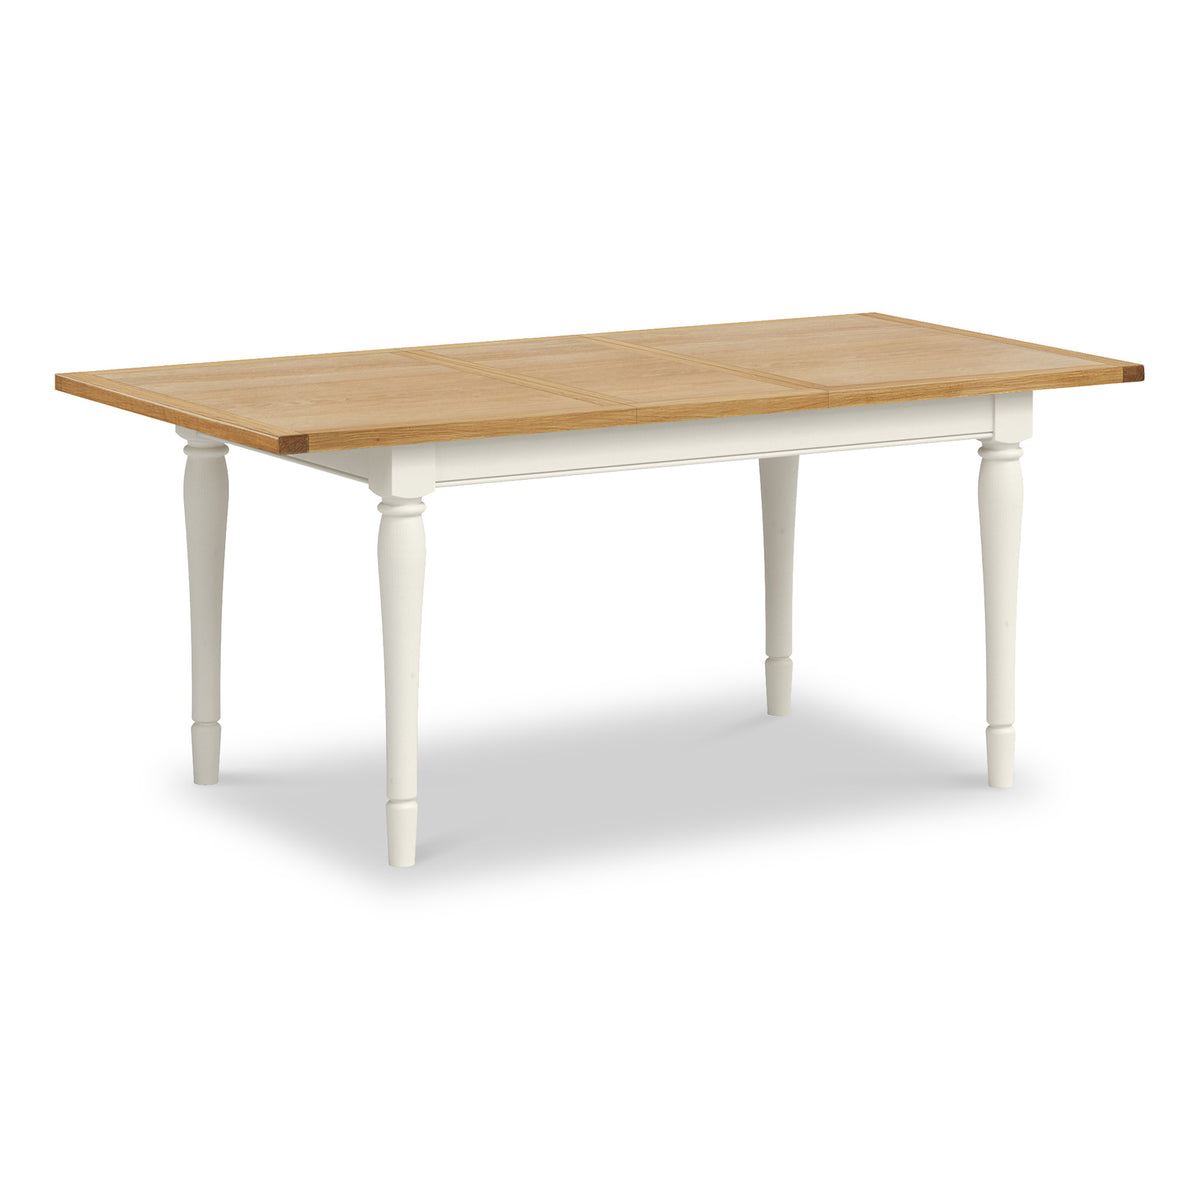 Bude Ivory Rectangular Extending Dining Table from Roseland Furniture